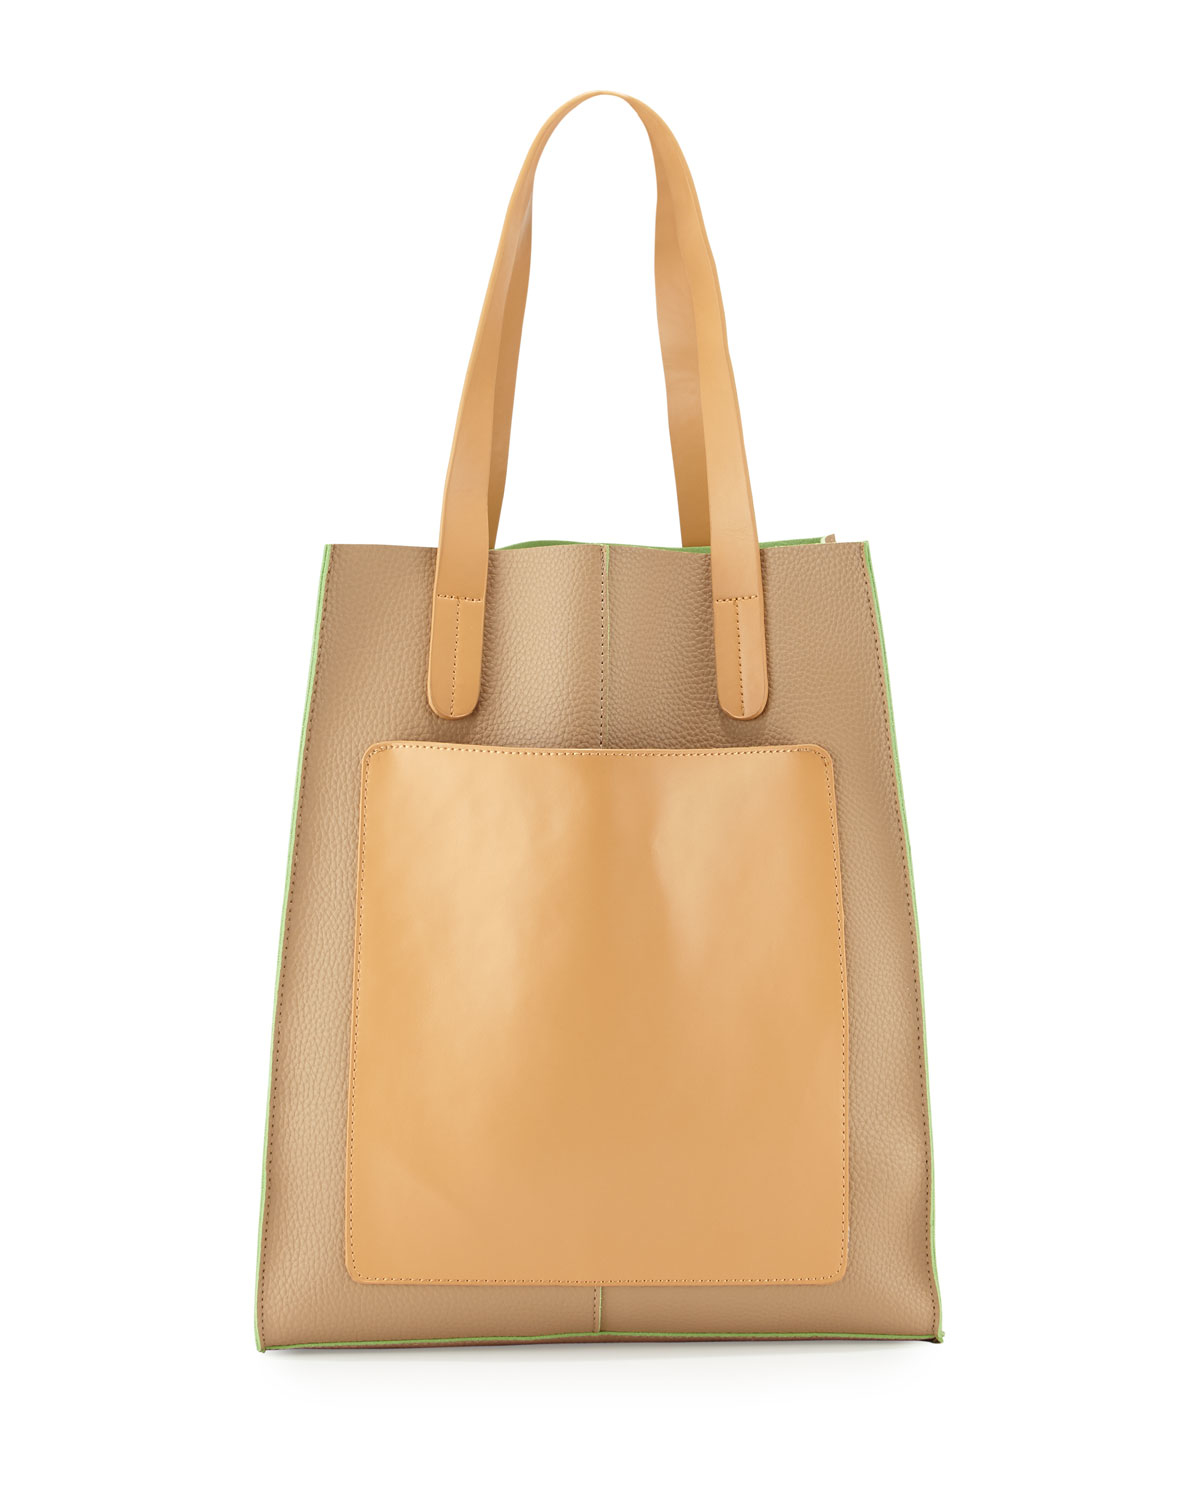 Neiman marcus Colorblock Leather Tote Bag in Natural | Lyst